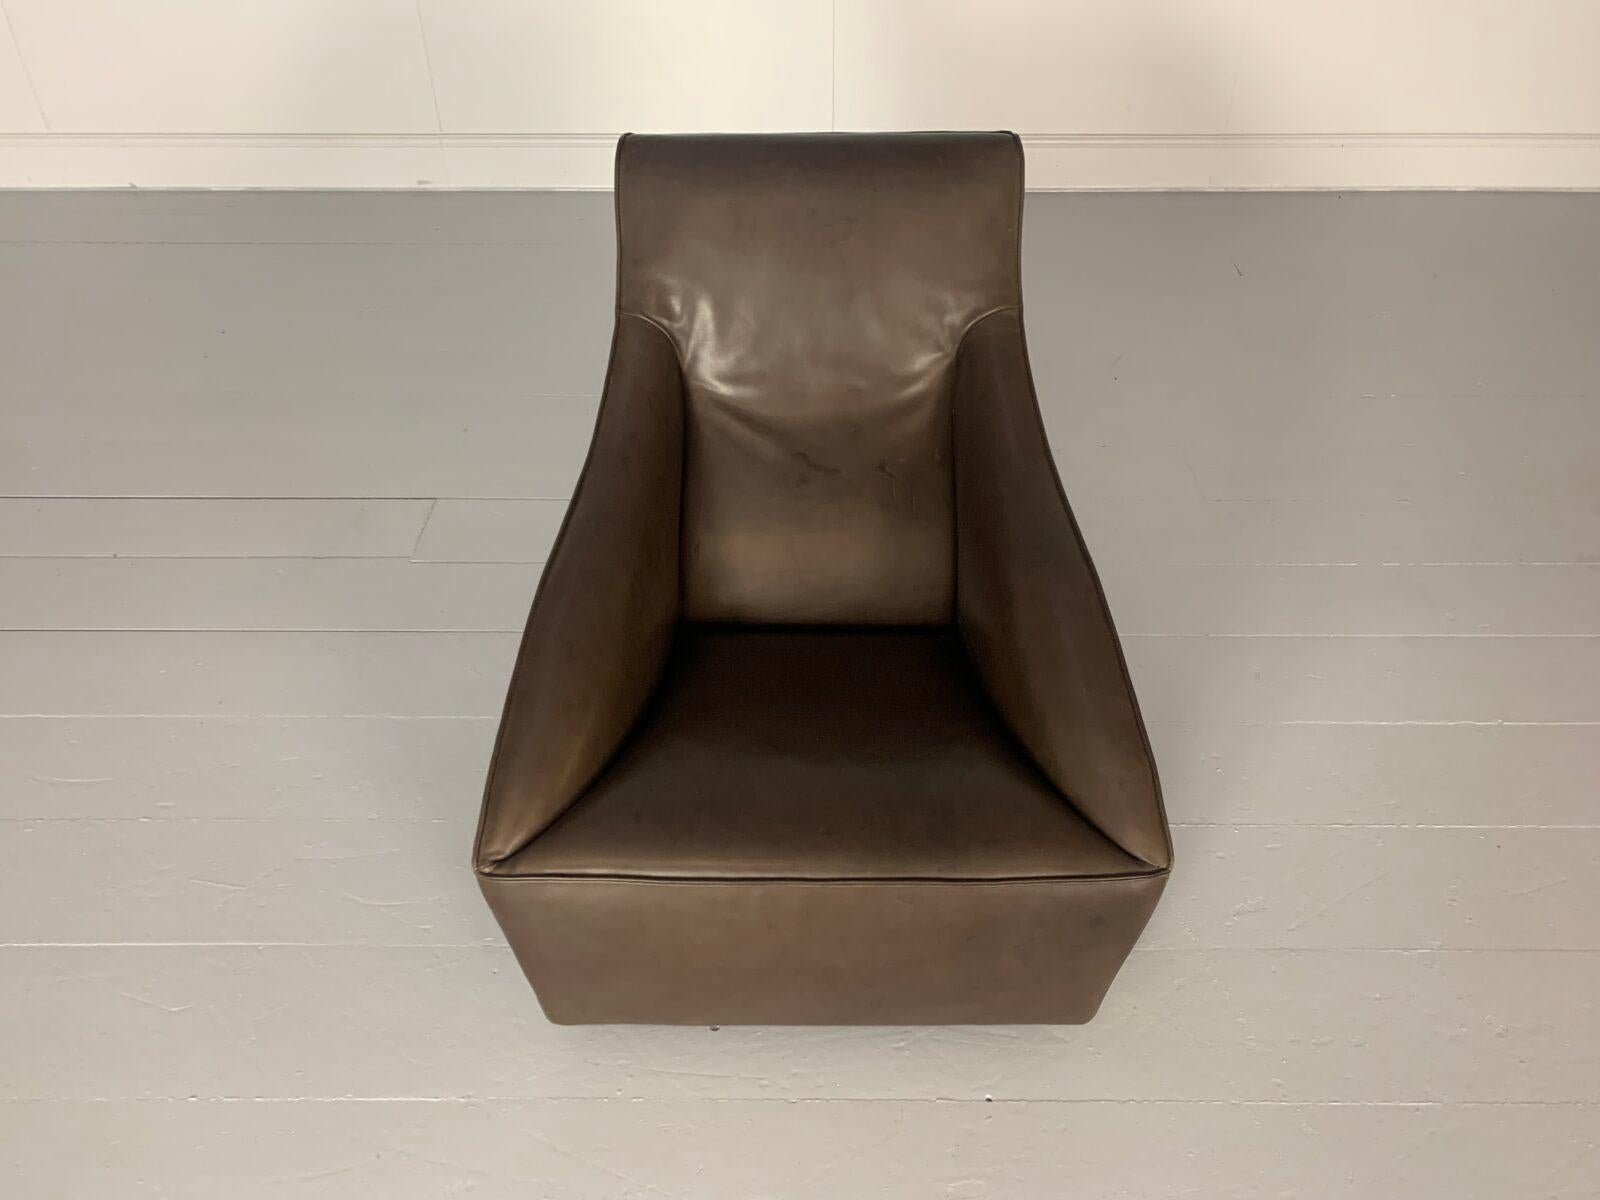 Molteni & C “Doda” Armchair - In Pale-Walnut Brown Leather In Good Condition For Sale In Barrowford, GB